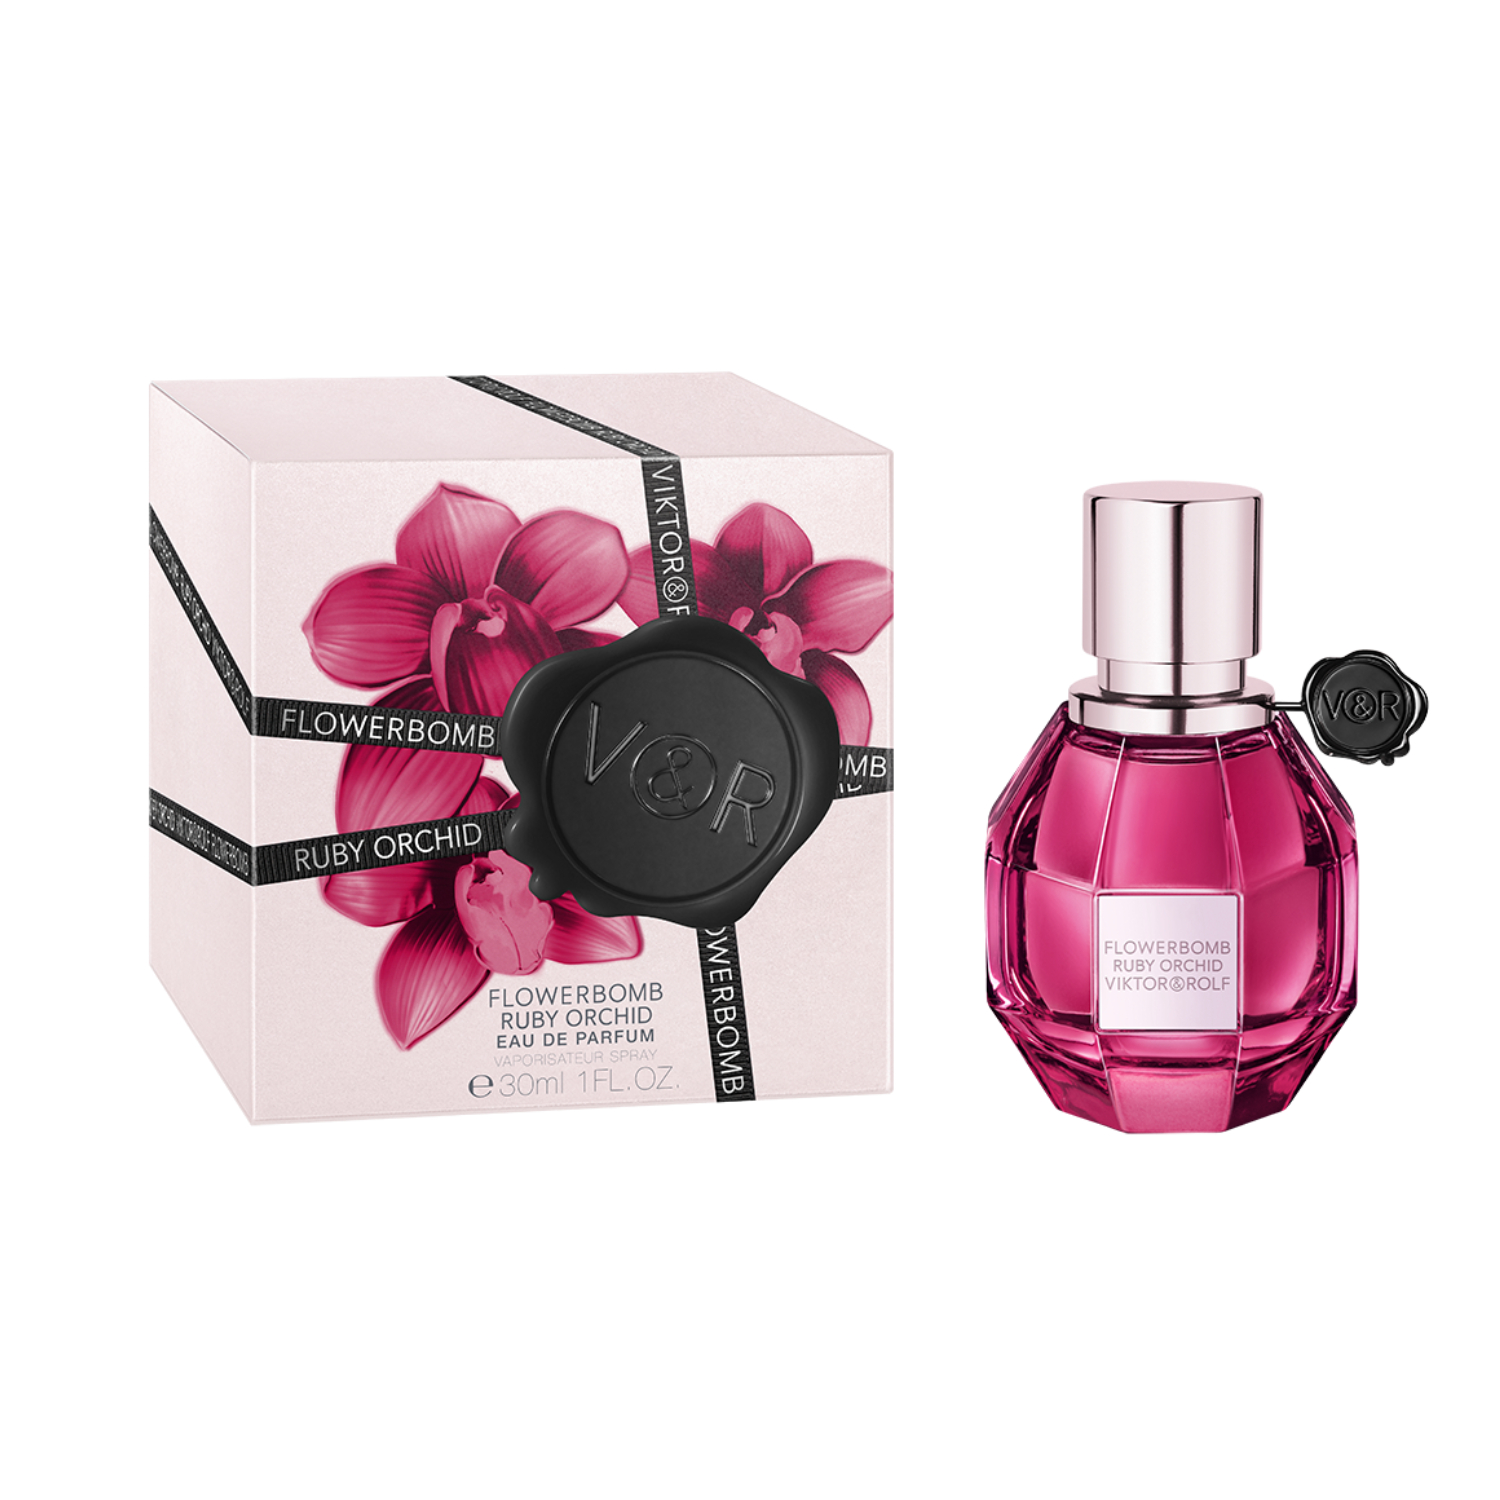 vr fbb ruby orchid edp 30ml 3614273622677 box and product sd